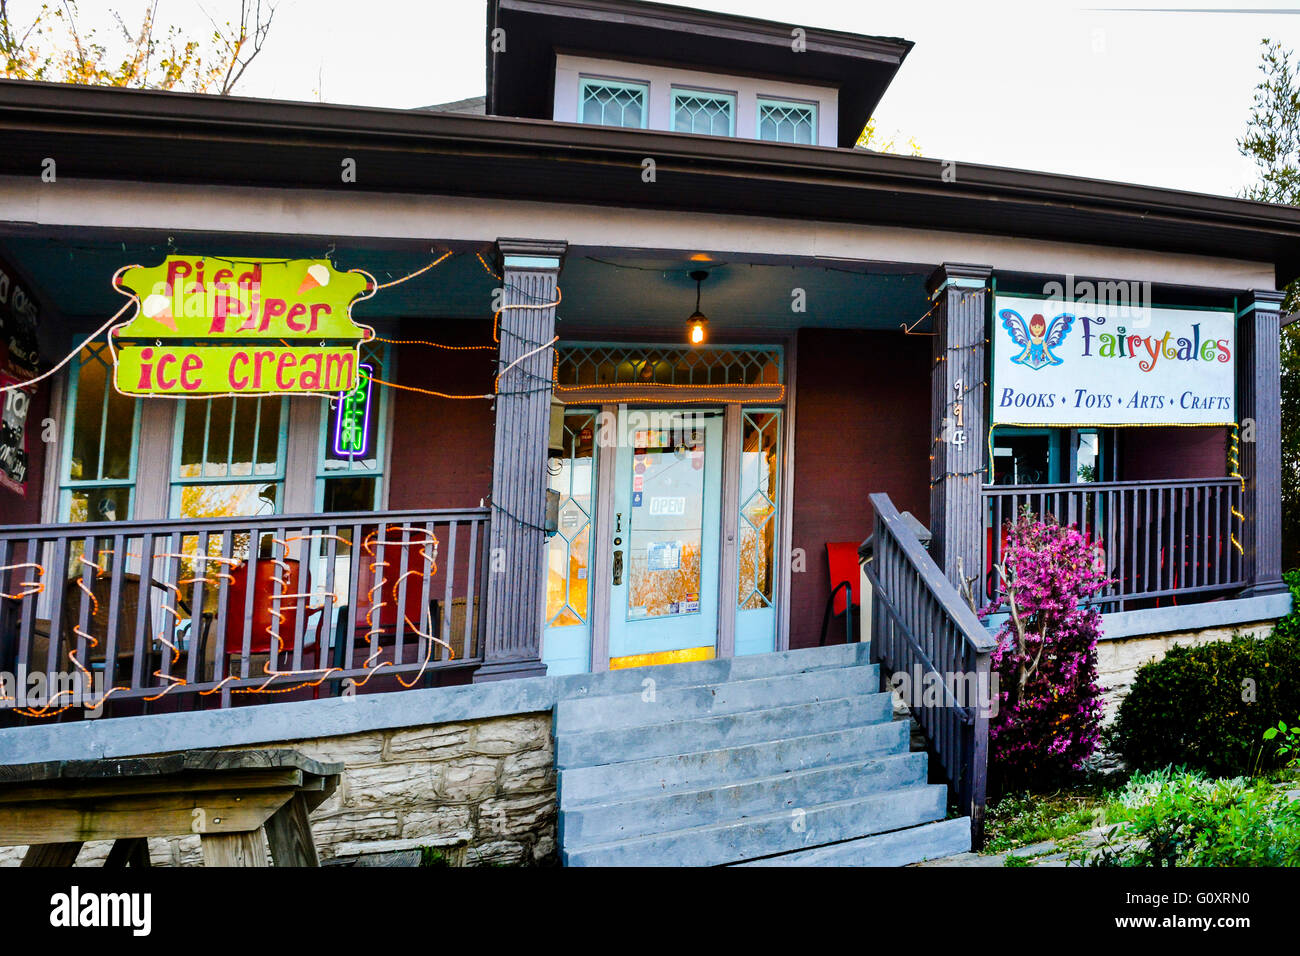 The Pied Piper Ice Cream Shop and Fairytales Book, Arts and Crafts stores share house in 5 Points district of East Nashville, TN Stock Photo